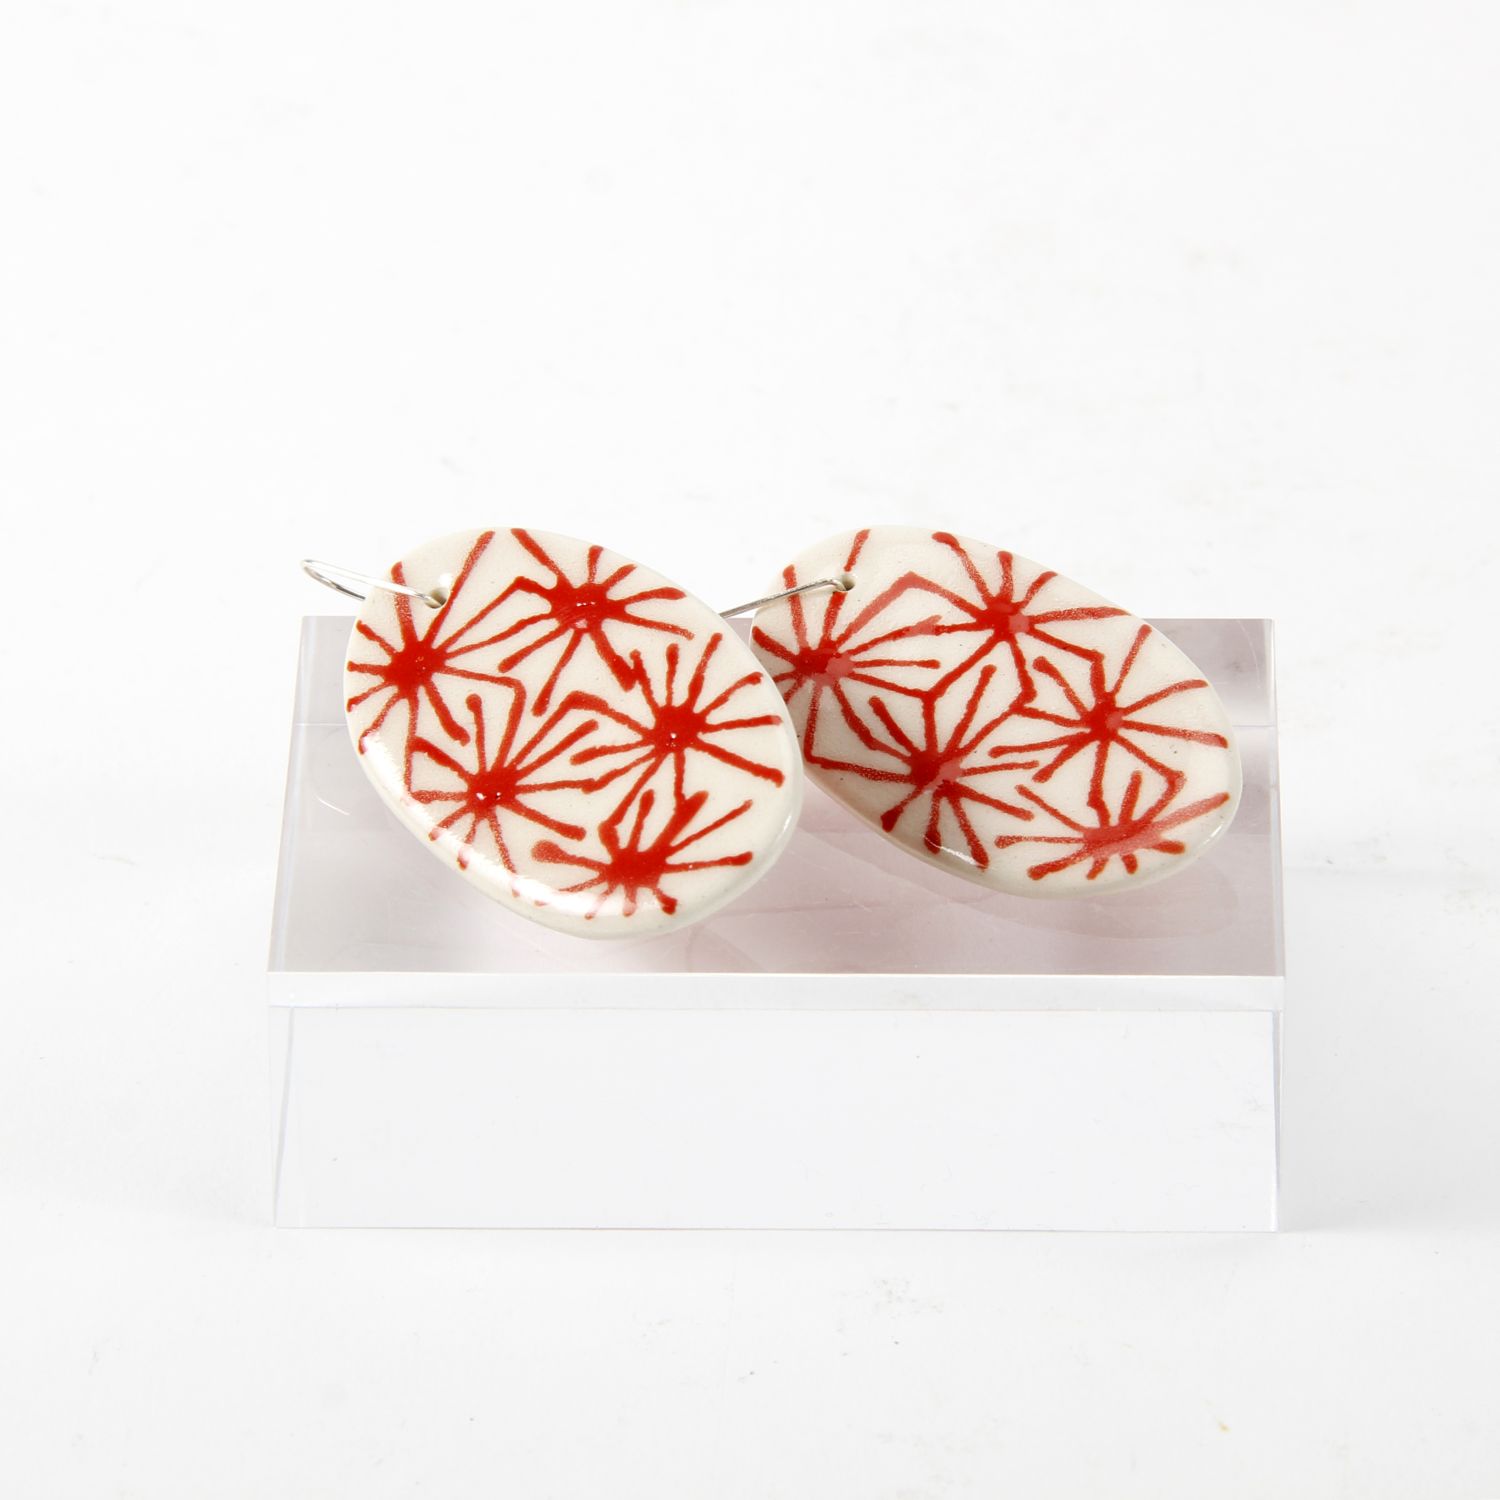 Here and Here: Disc Earrings with Fireworks Product Image 2 of 2